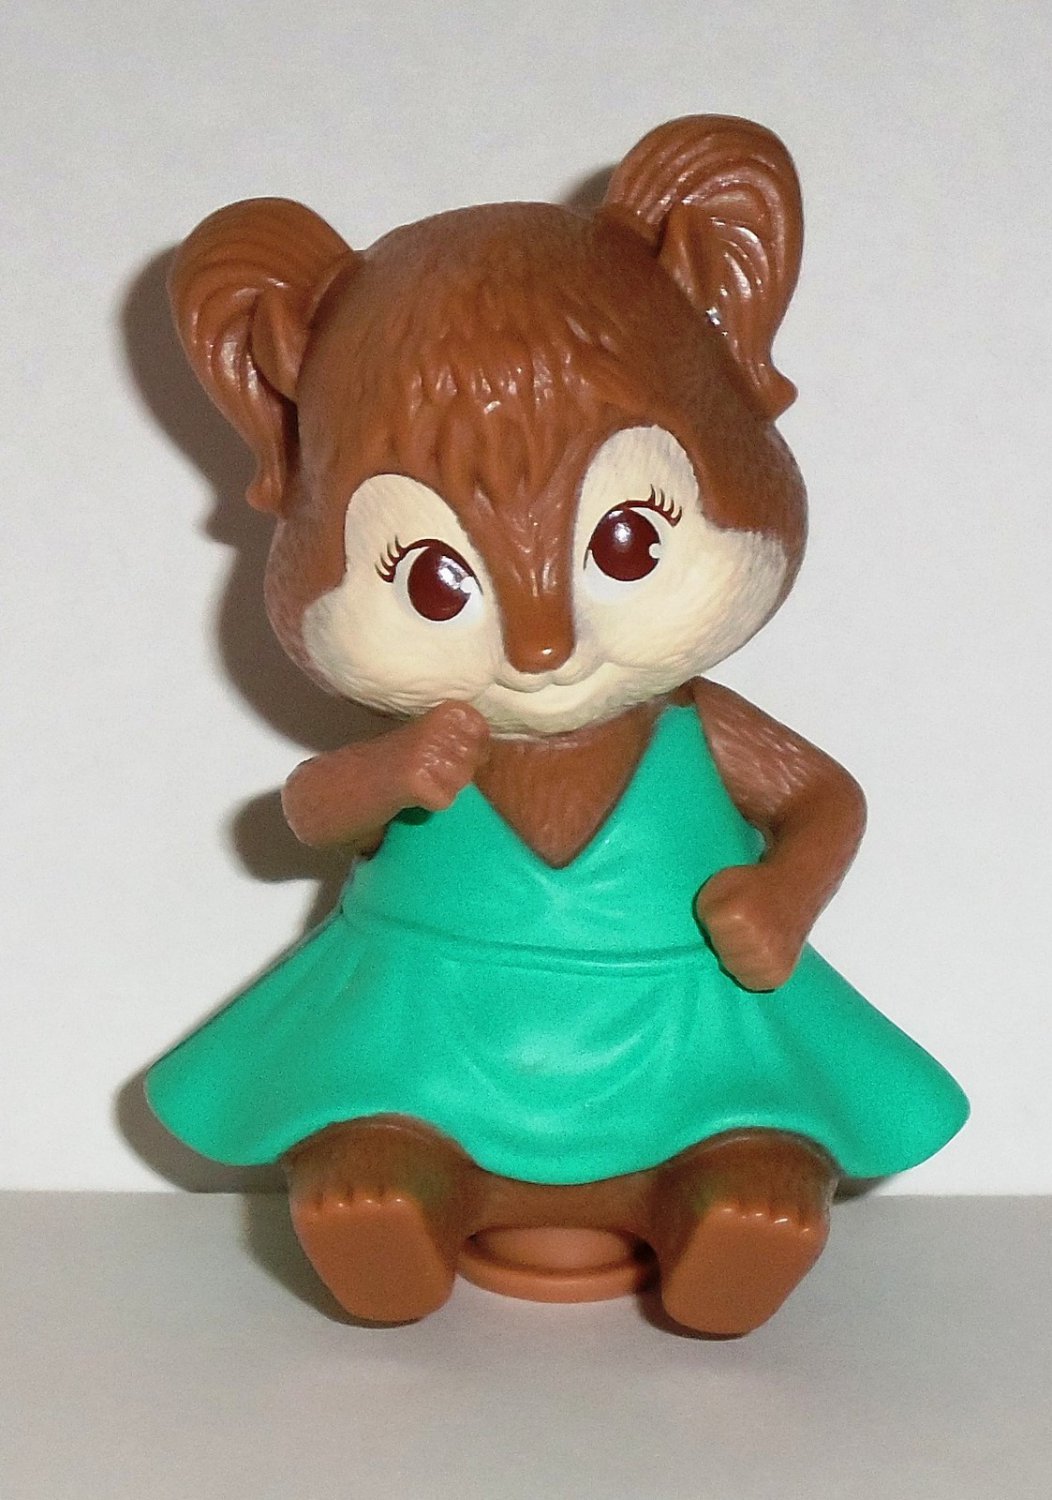 2011 The Chipmunks Chipwrecked McDonalds Happy Meal Toy Alvin #1